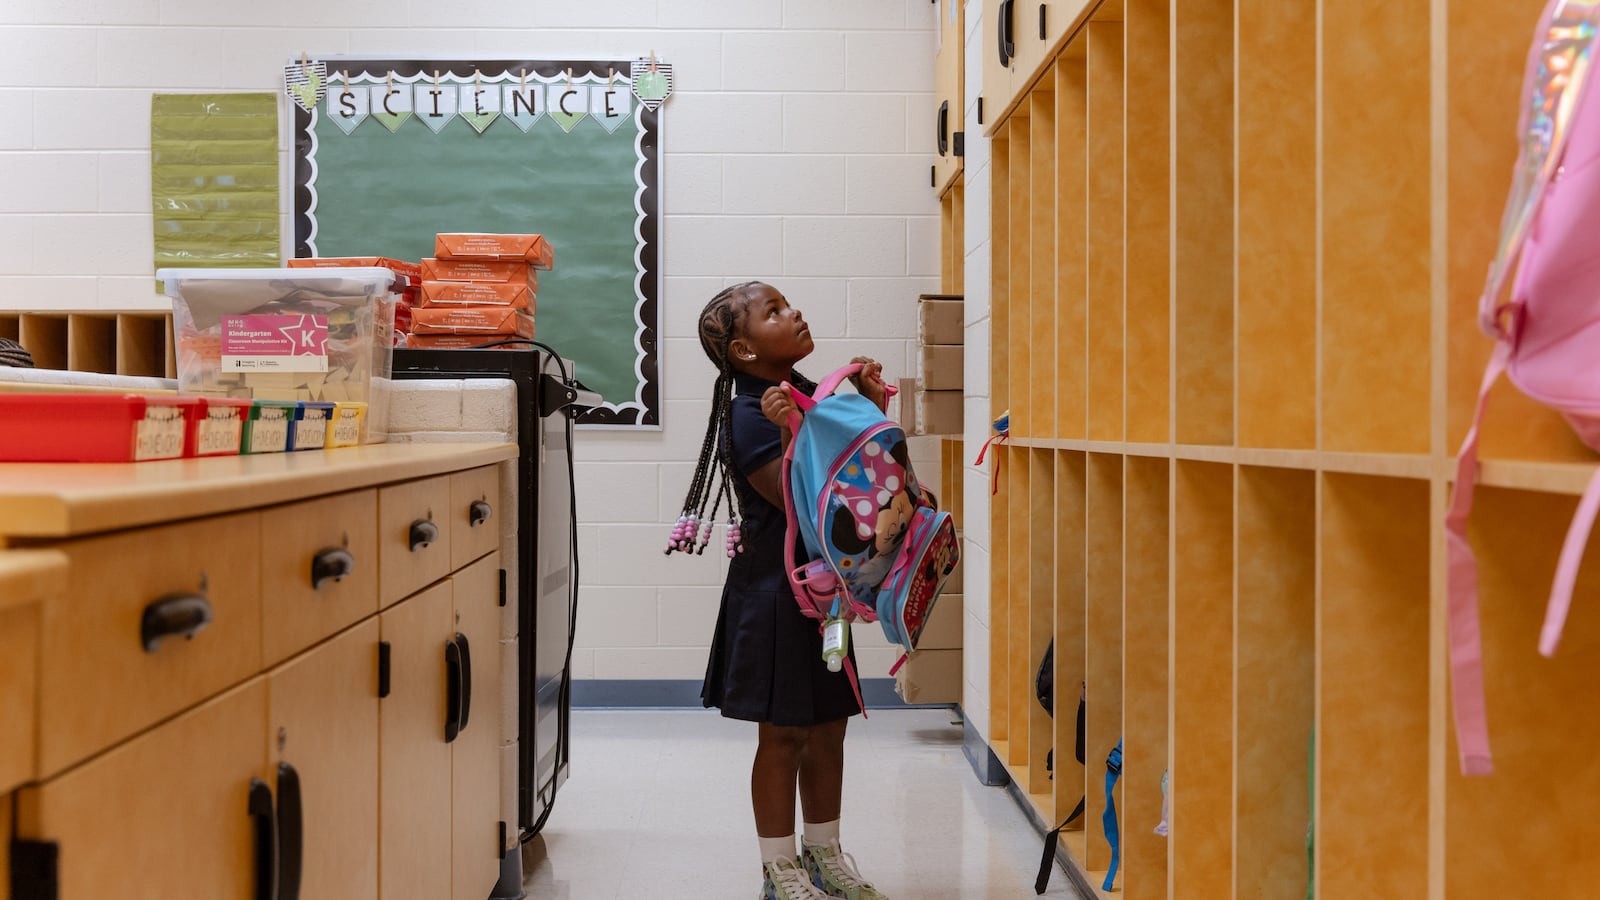 A young student with long braids stands between a desk and wooden cubbies and lifts her blue and pink backpack into her cubby. There is a white brick wall with a green board in the background.